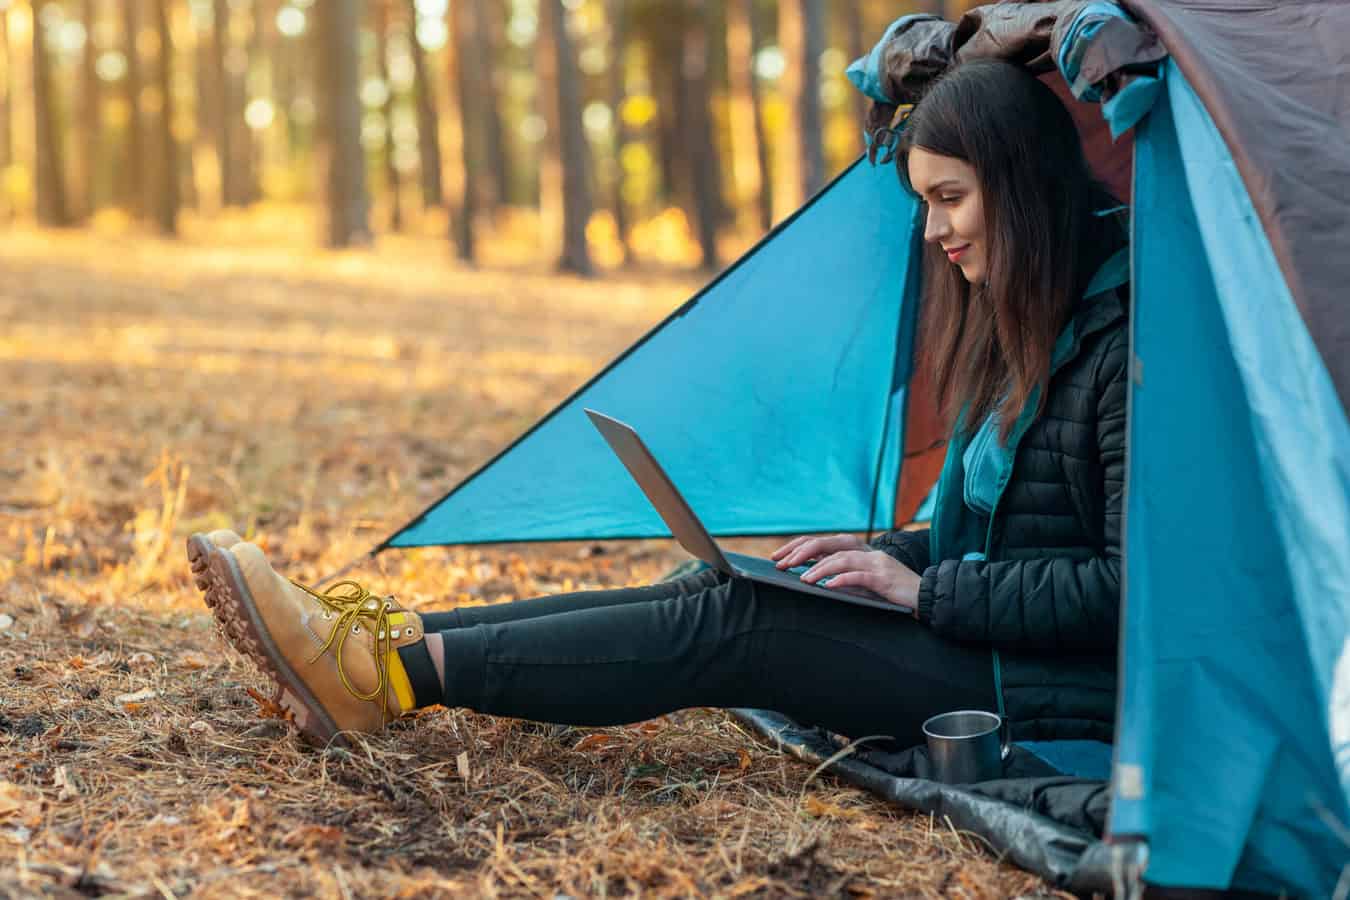 Women uses laptop outside while tent camping.